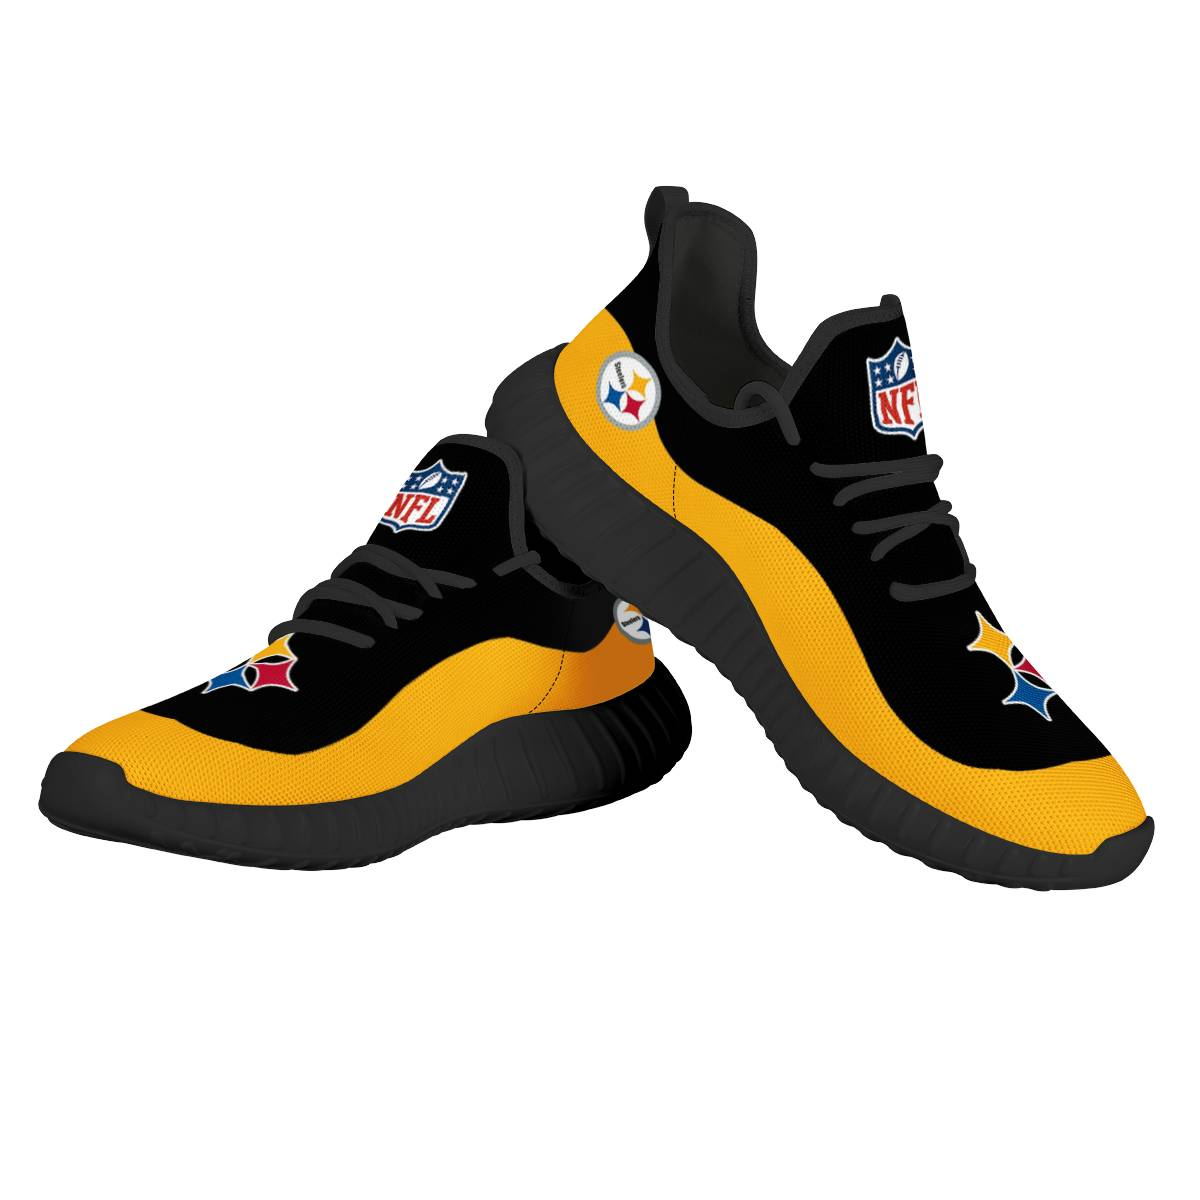 Women's NFL Pittsburgh Steelers Mesh Knit Sneakers/Shoes 005